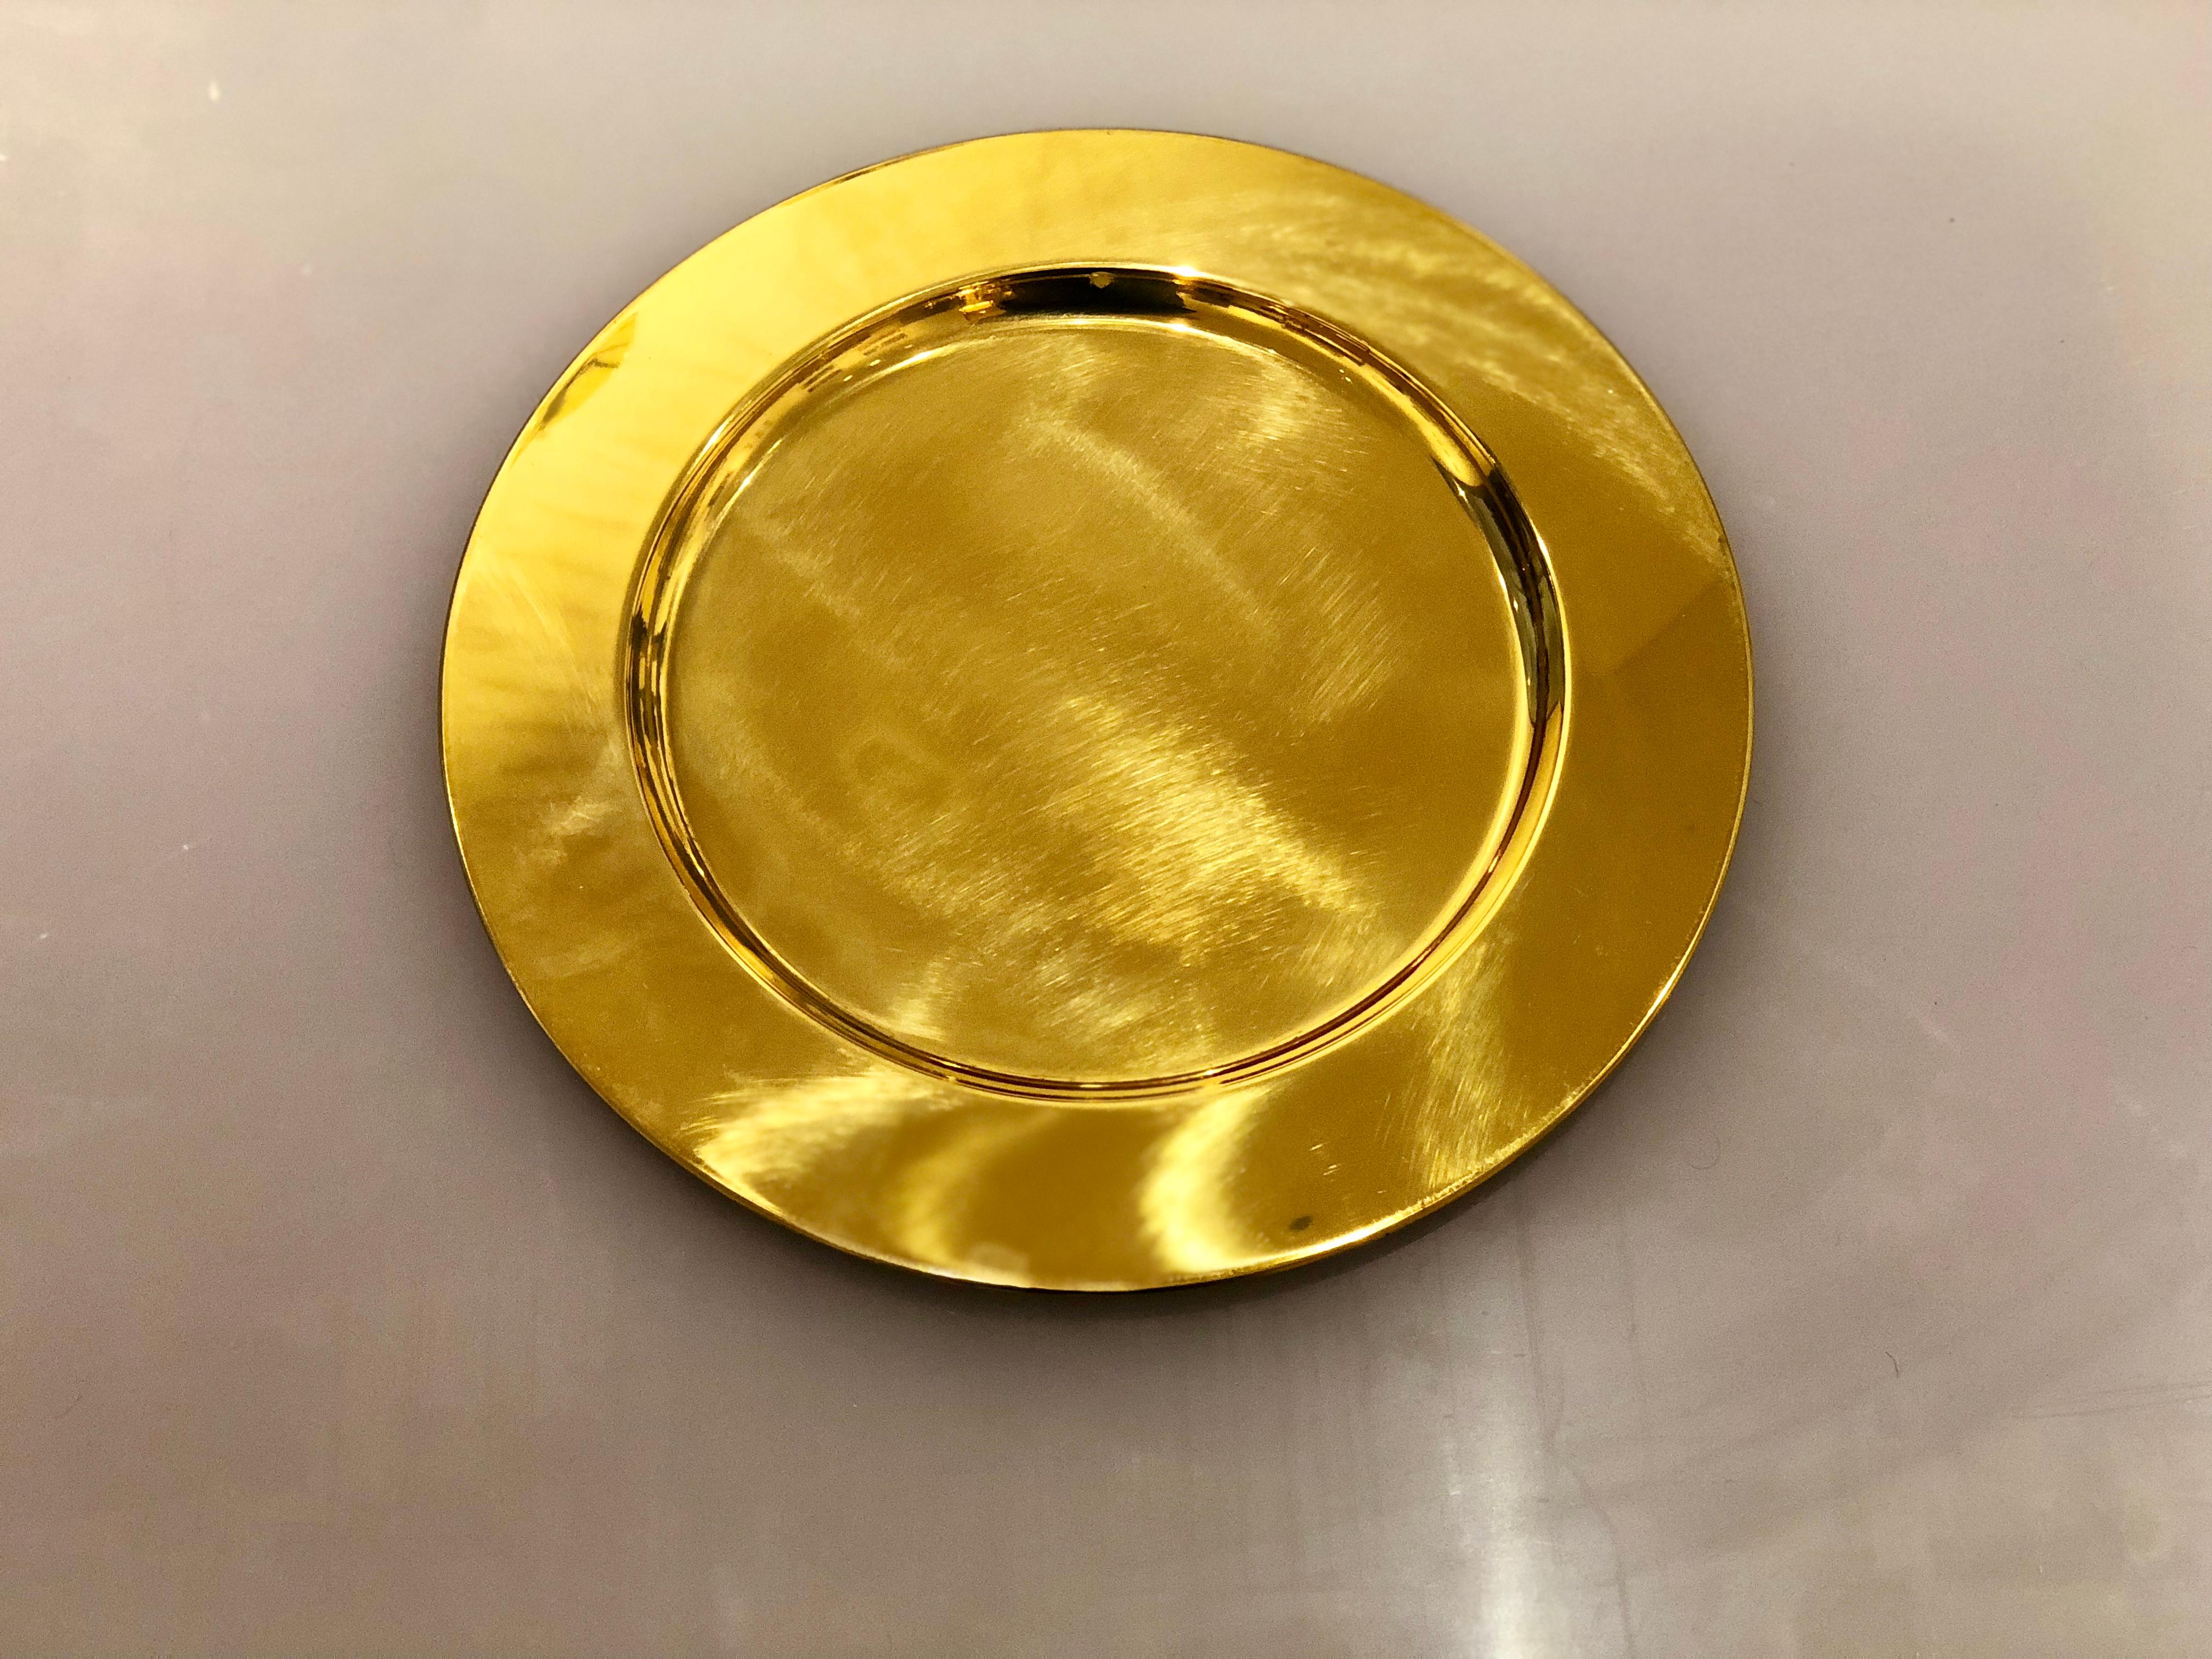 brass charger plates